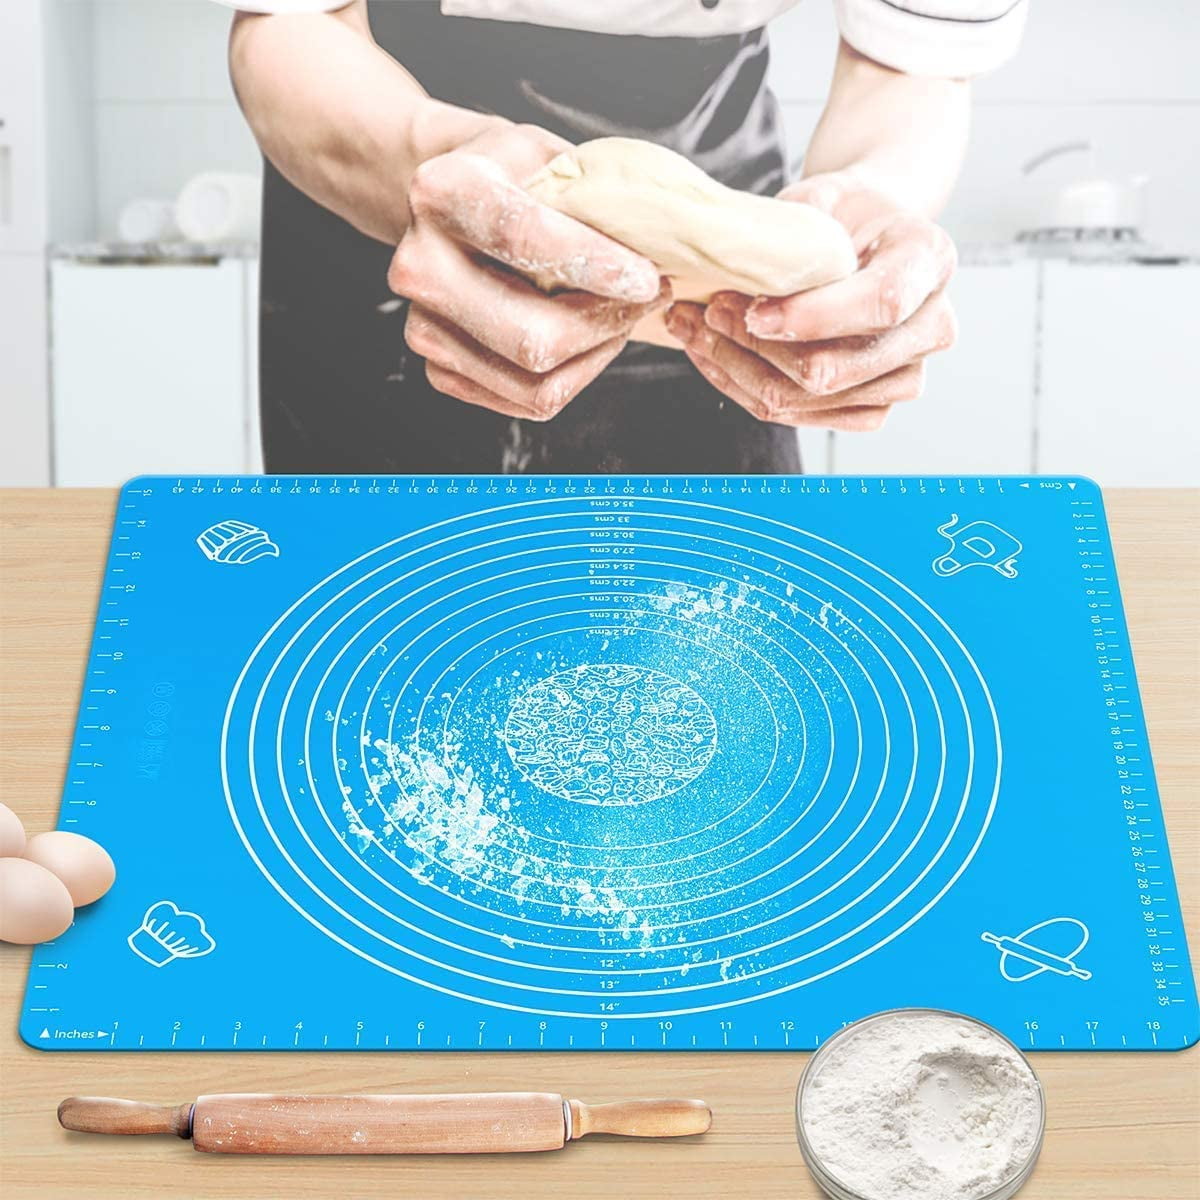 20*16 in Non-Stick Silicone Baking Mat Kneading Rolling Pastry Dough Fondant Pad